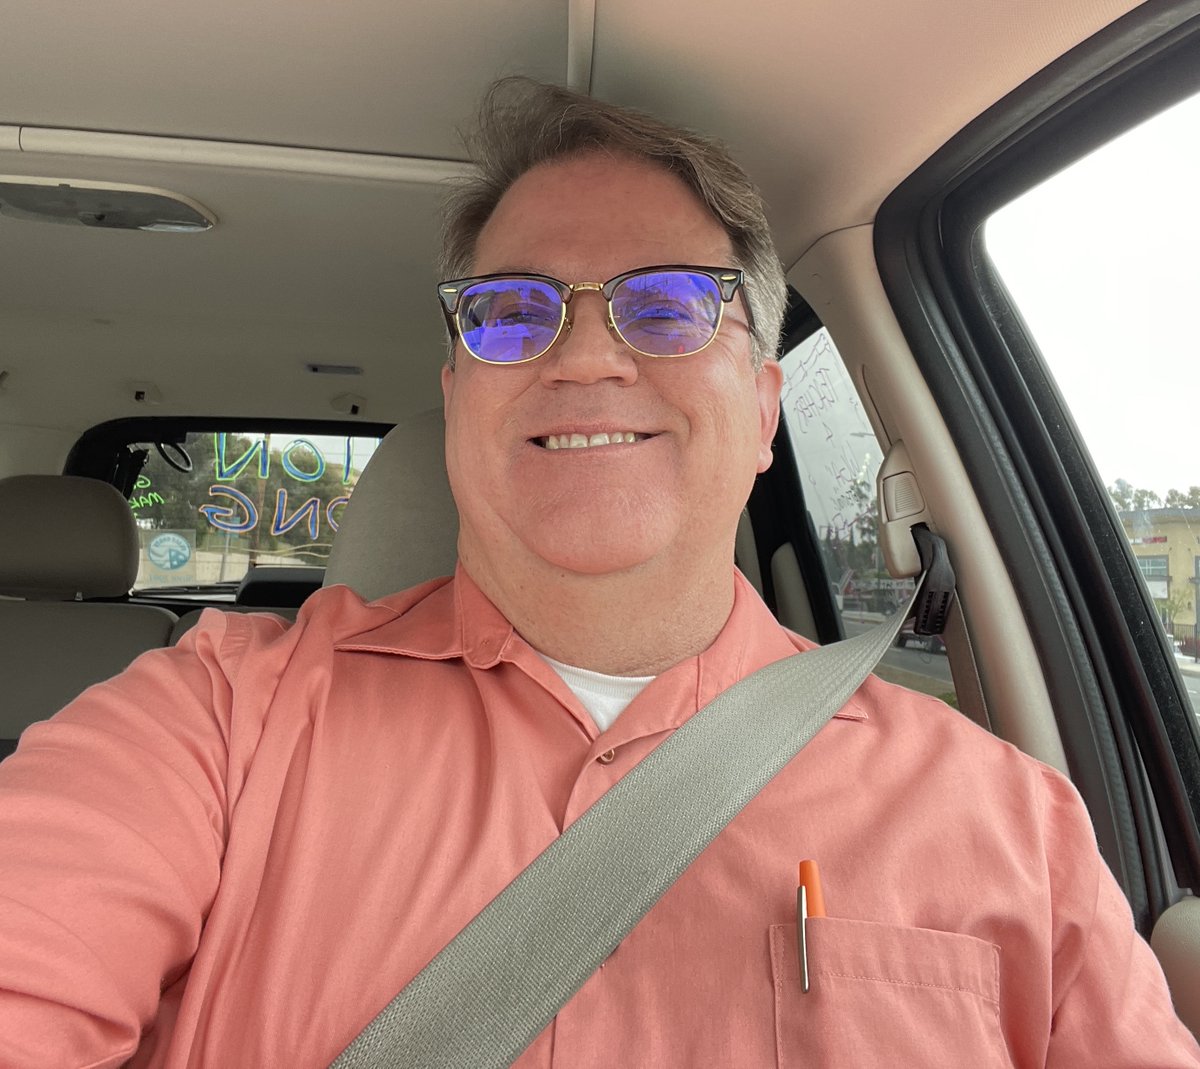 Selfie alert! This just in from @CCUSD board member, Brian Guerrero, who wanted me to let you know he's parked and not selfie-ing while driving. :) Thanks for being a supporter of gun (and vehicle!) safety! #WearOrange